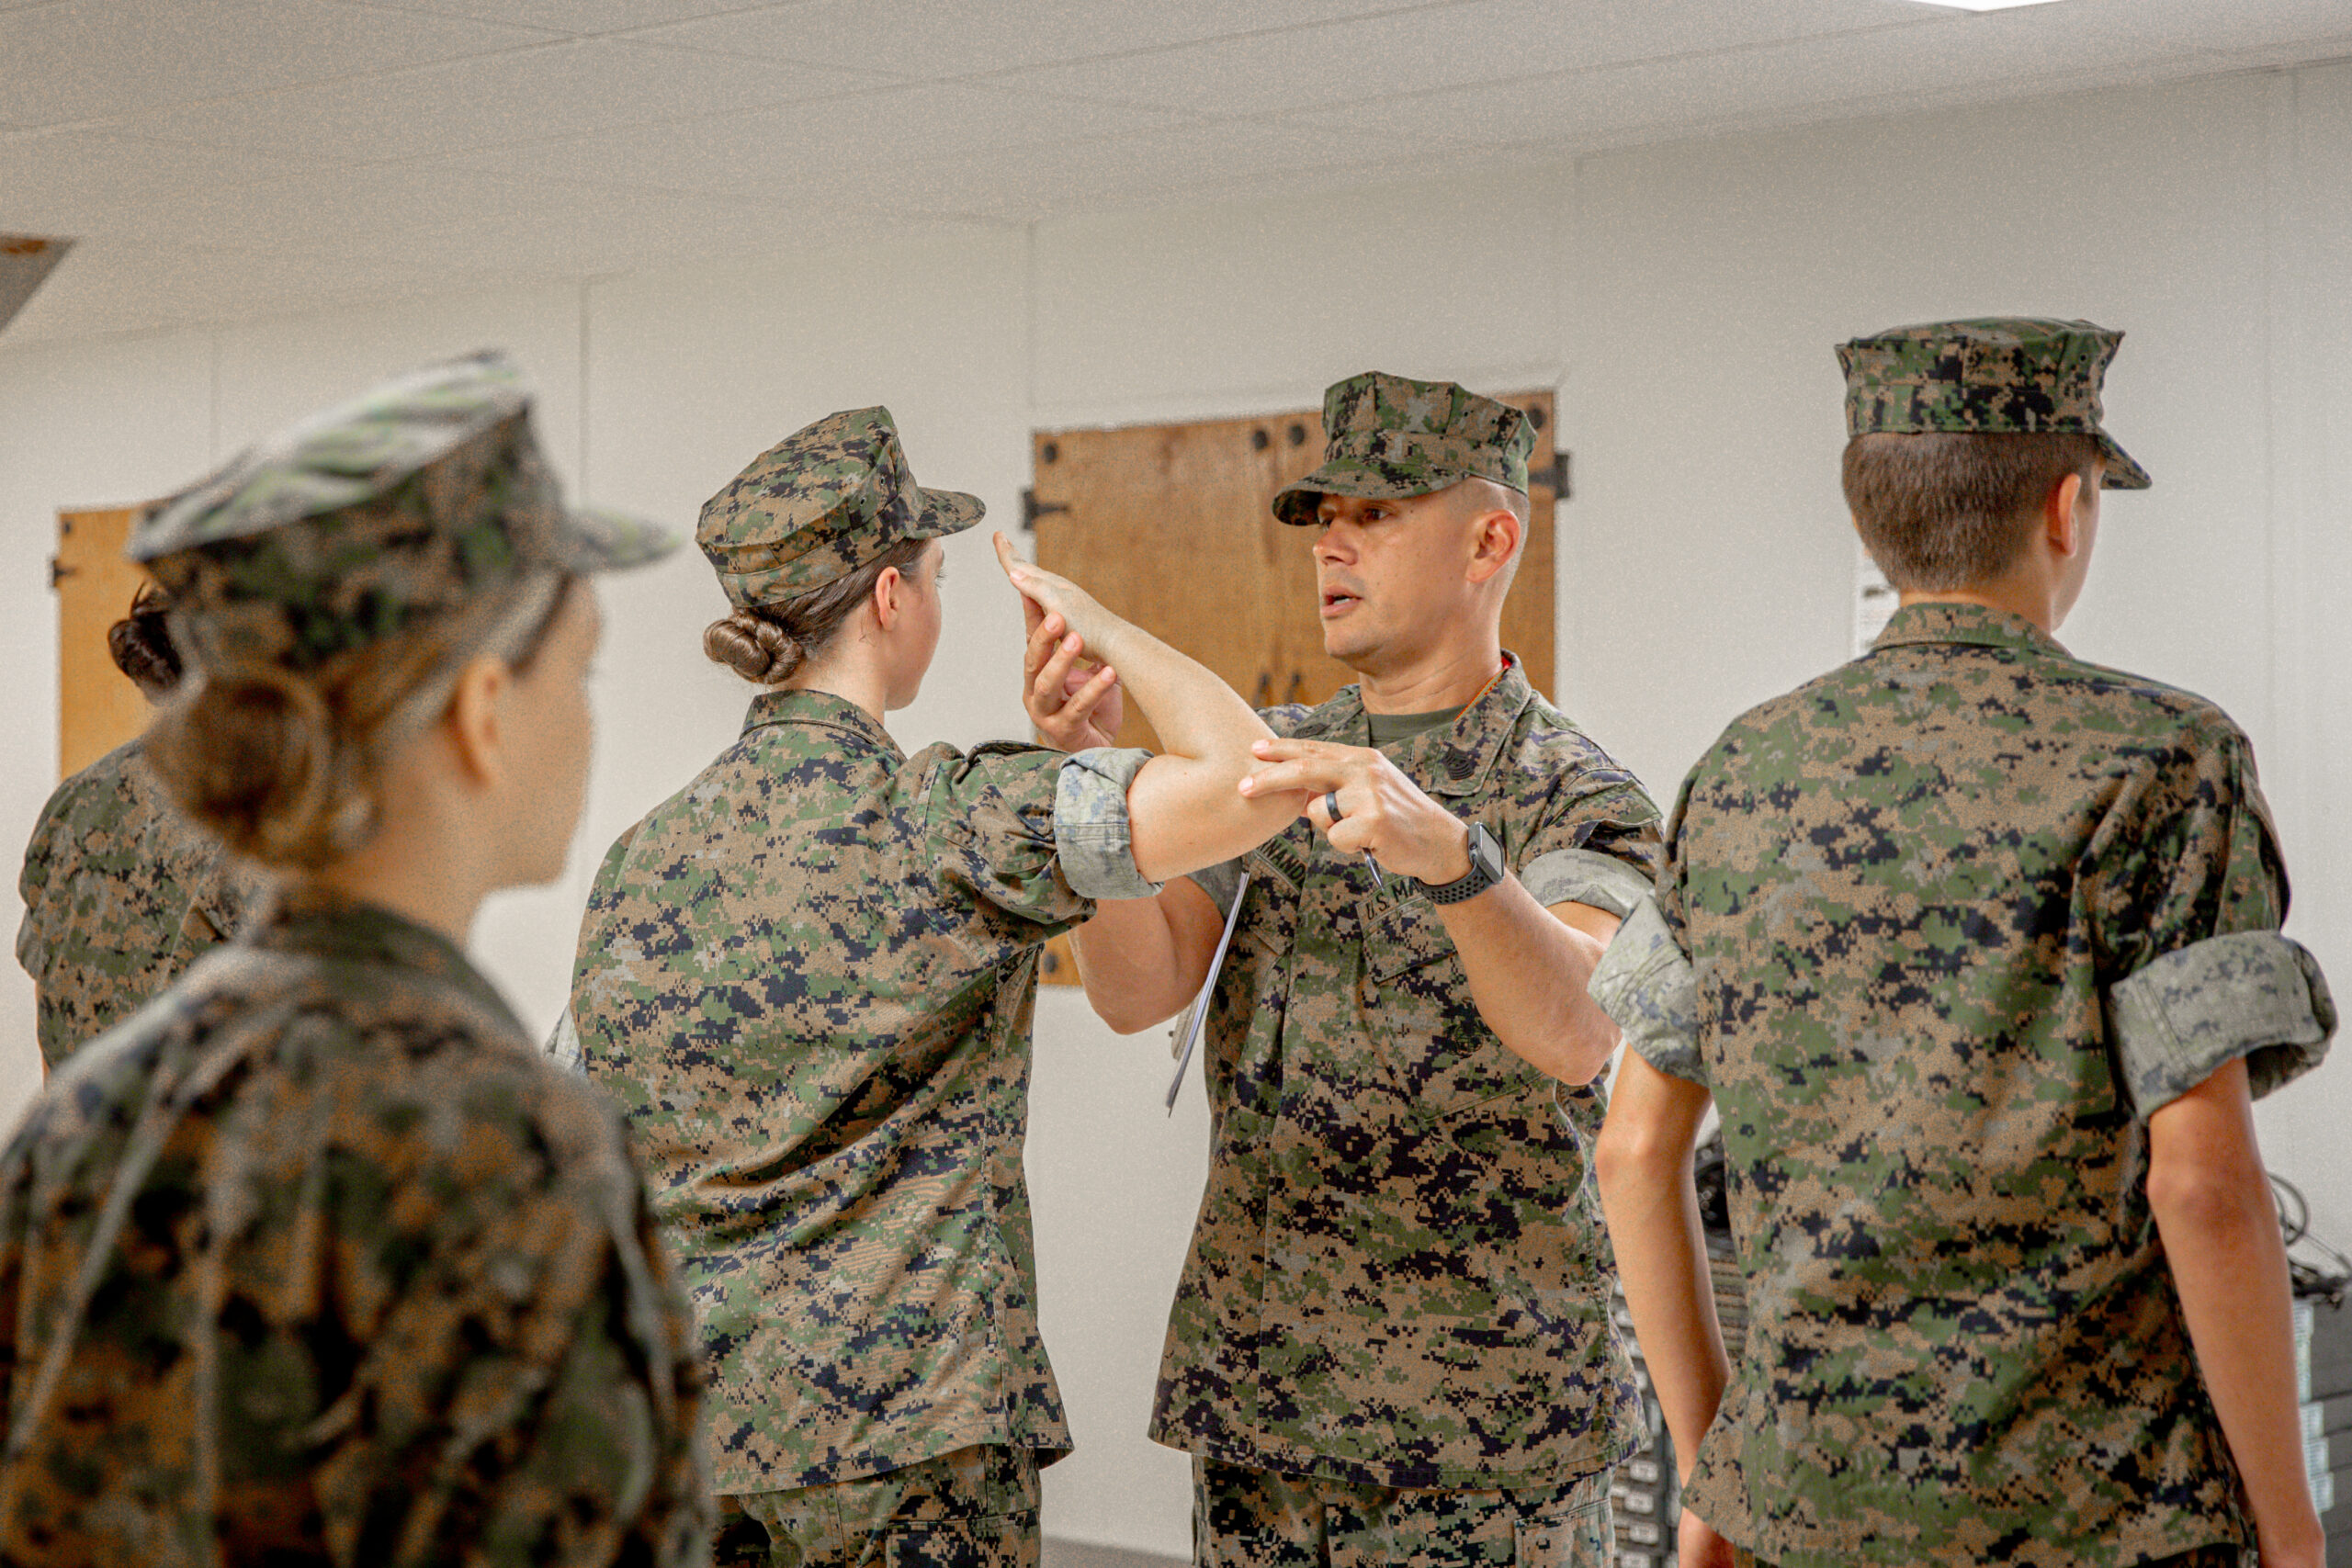 Hernandez moving a cadet's salute into the right position.